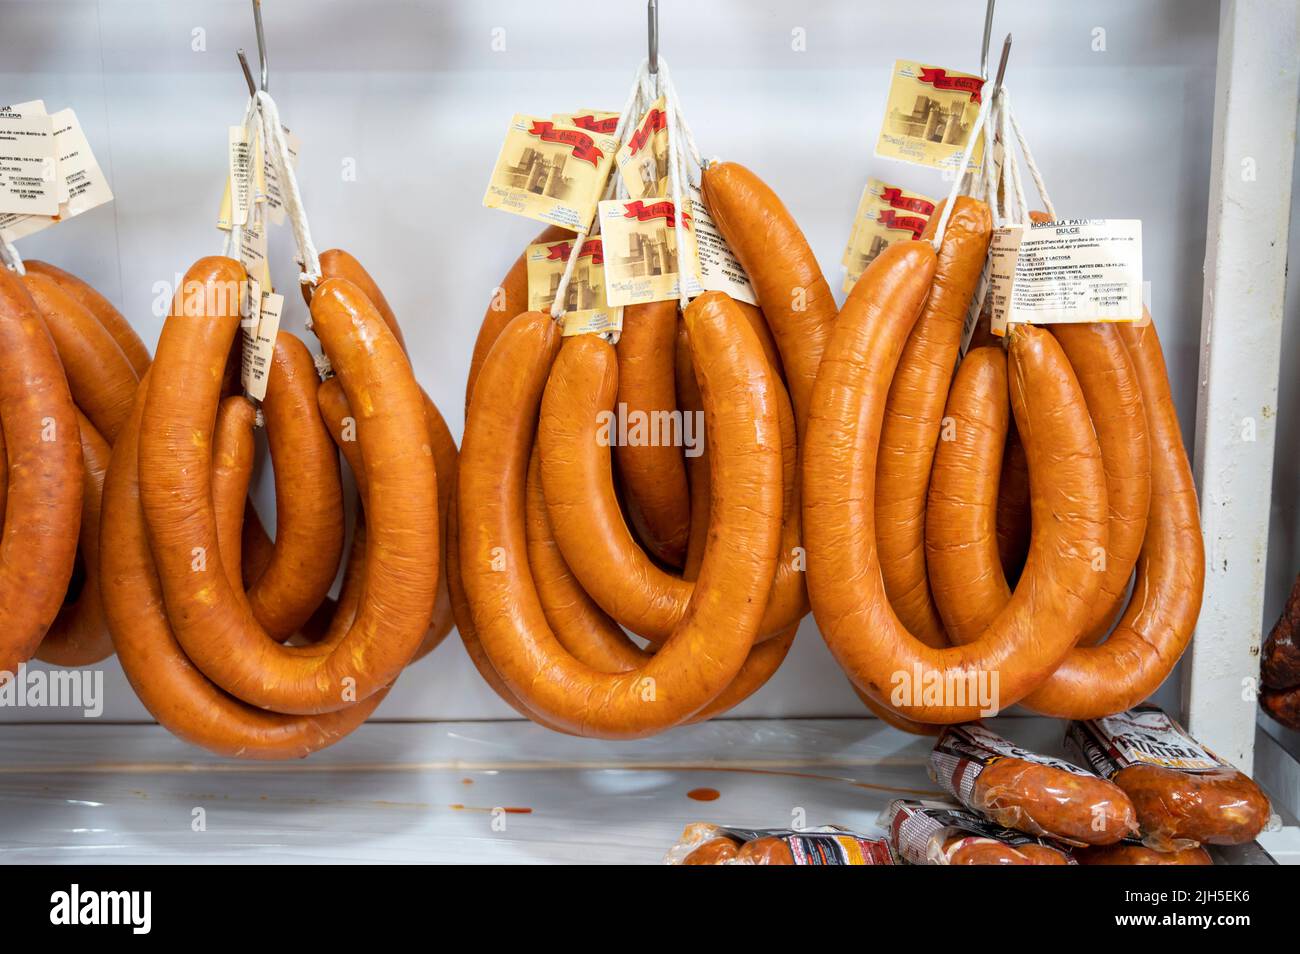 Sausages or charcuterie hanging up for sale in a shop in Spain Stock Photo